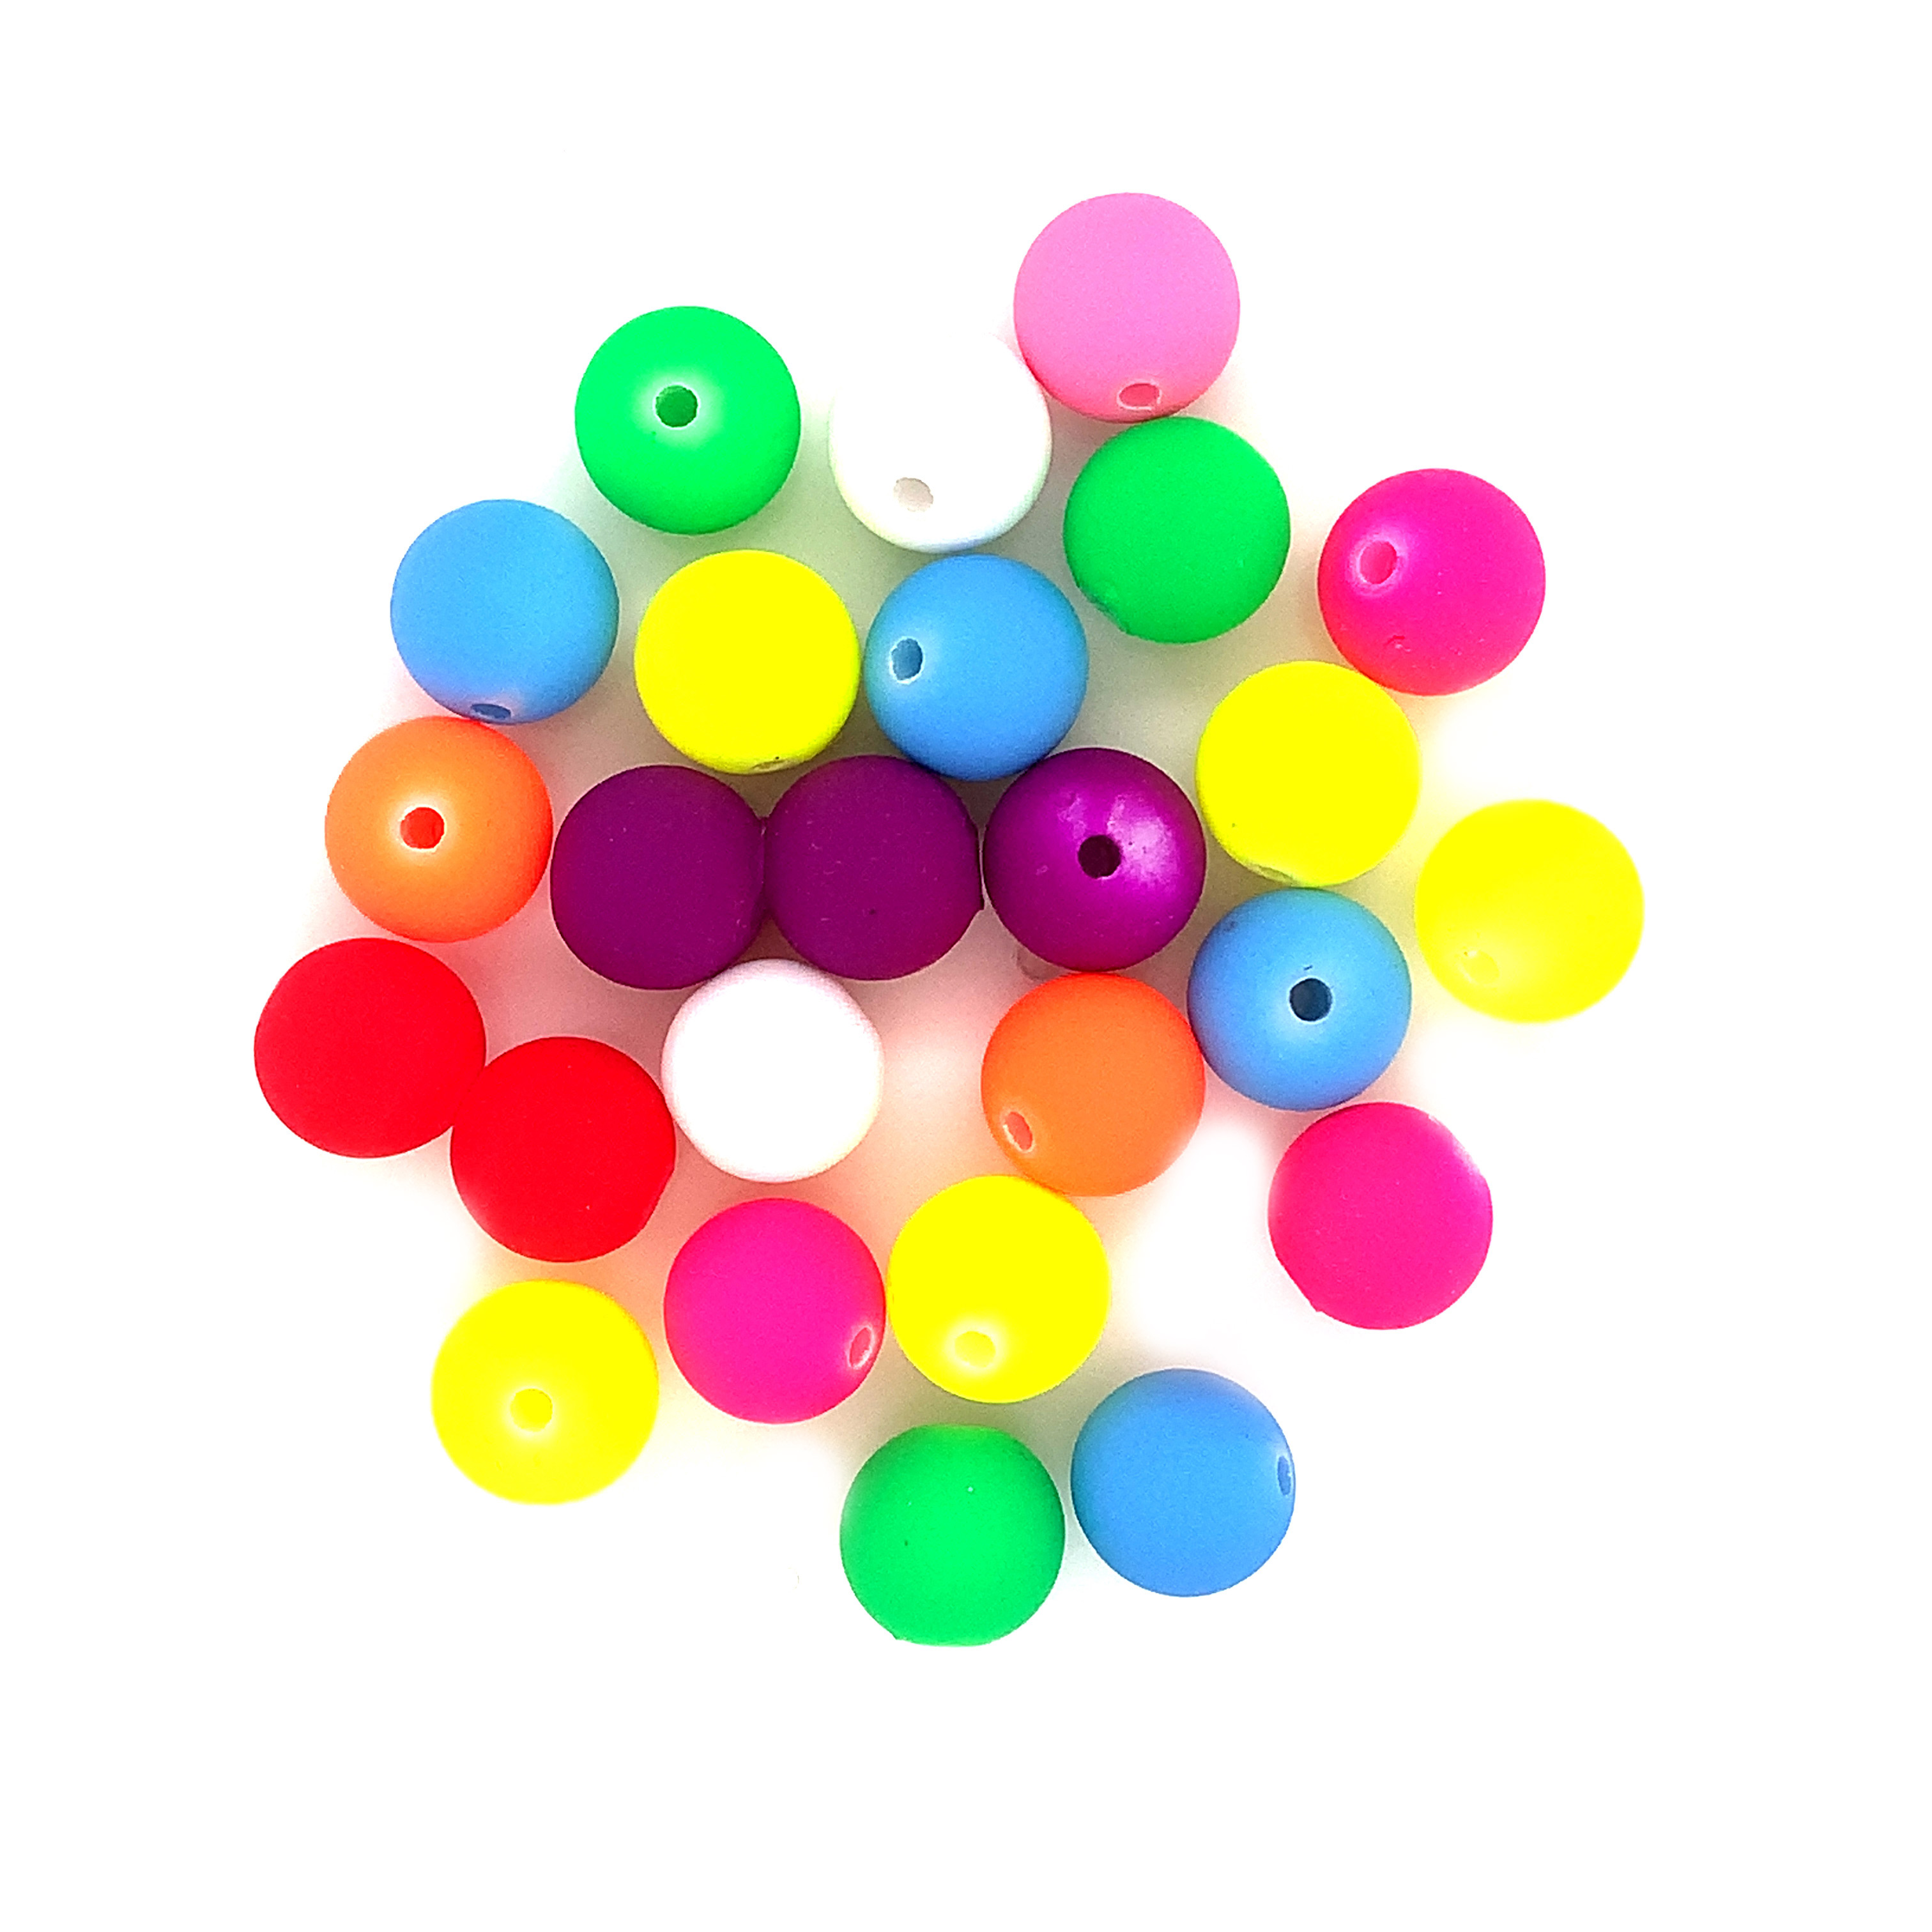 10mm Painted Acrylic Beads - Assorted Pack